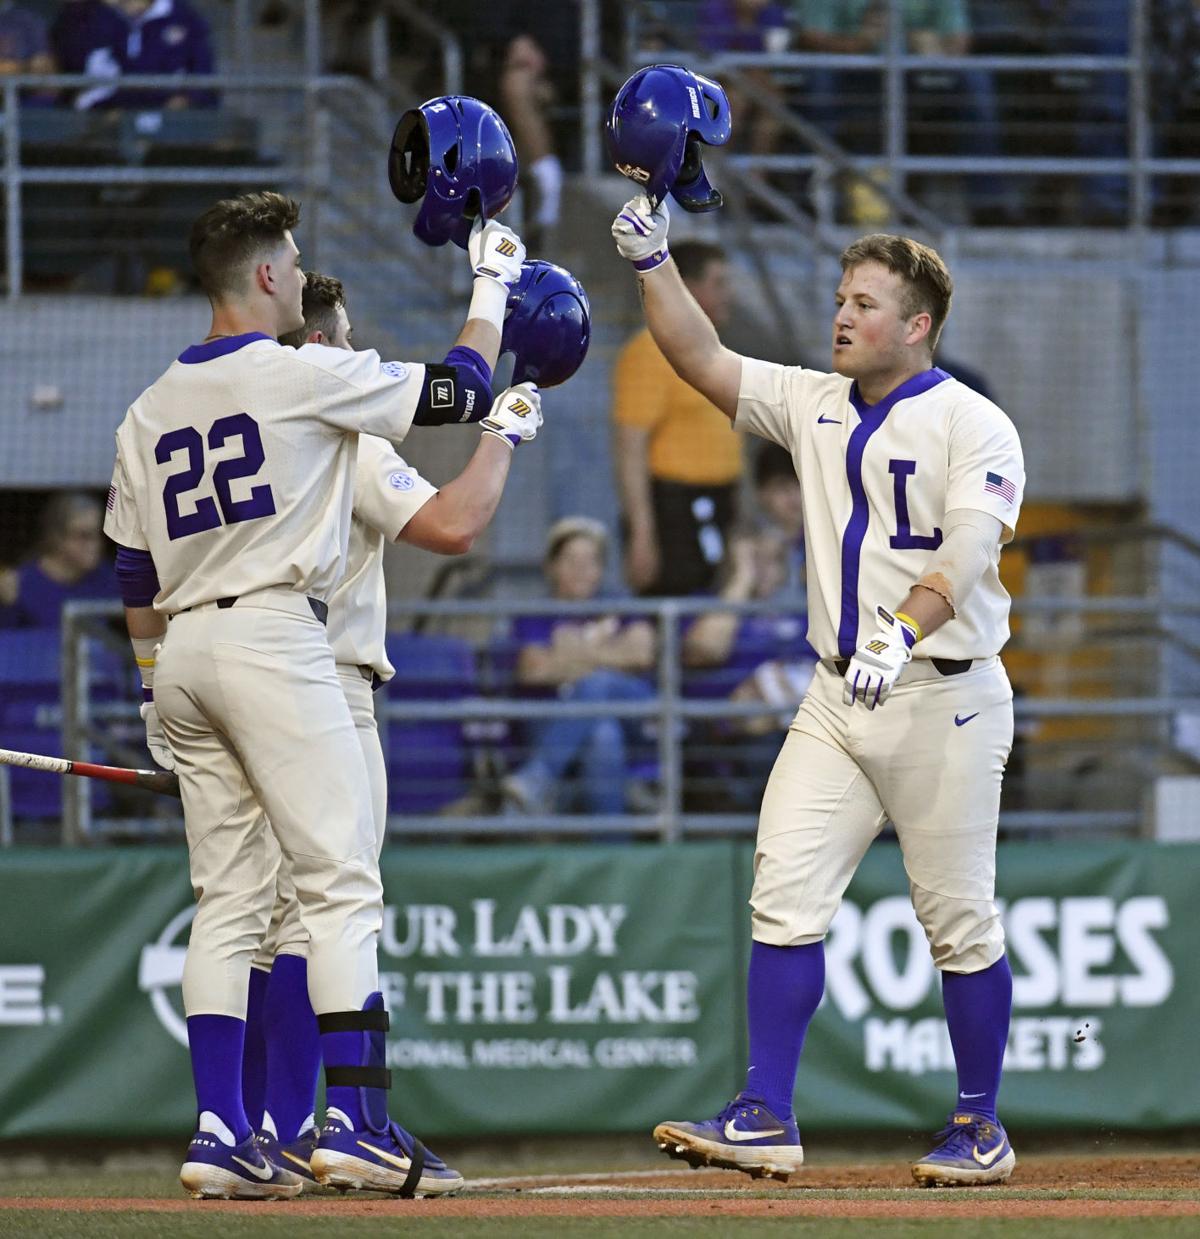 LSU baseball releases 2021 schedule; see dates and opponents | LSU